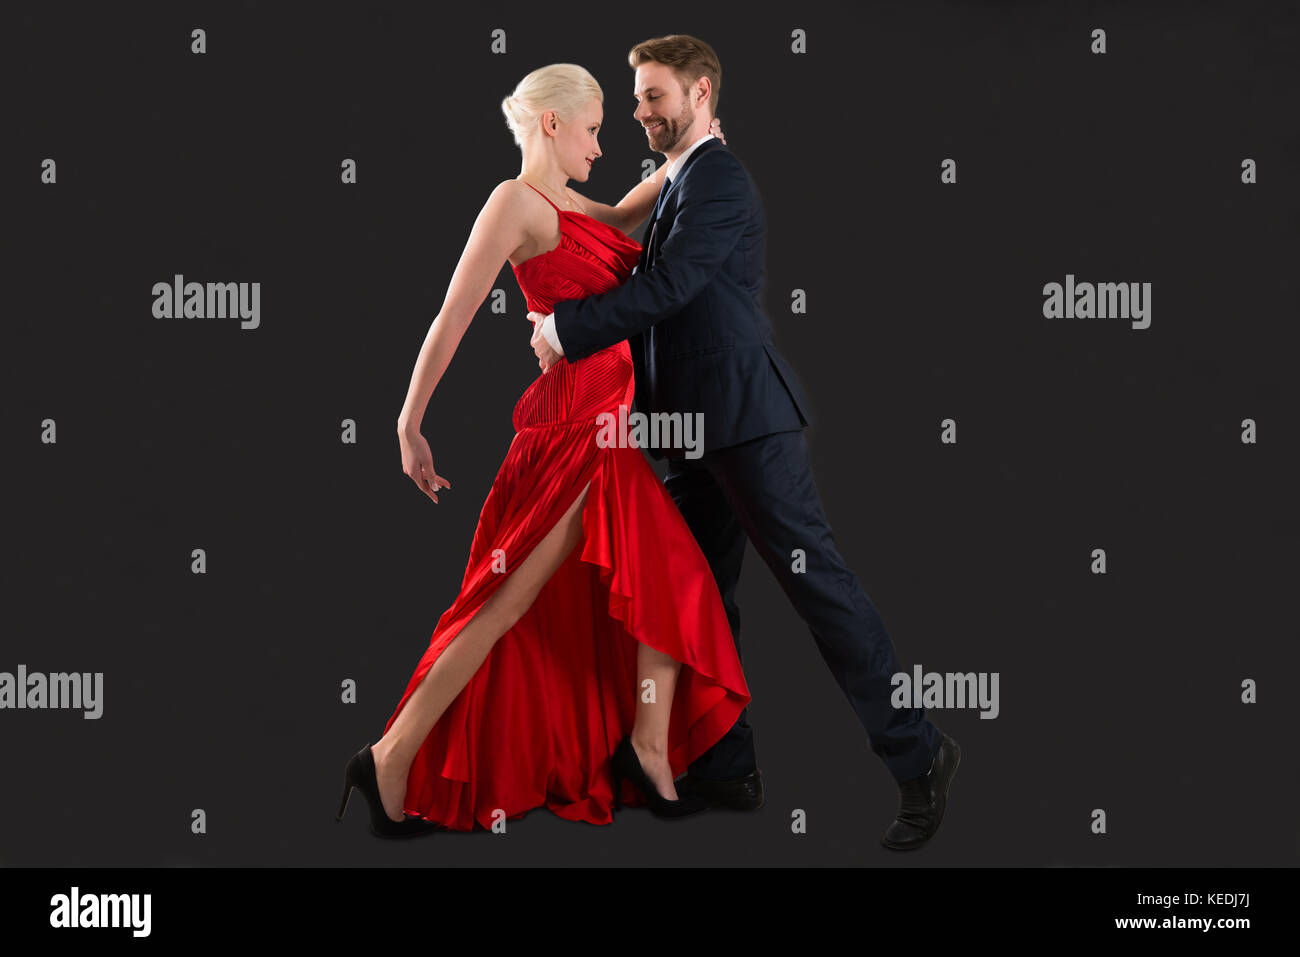 Portrait Of Young Happy Couple Dancing On Black Background Stock Photo